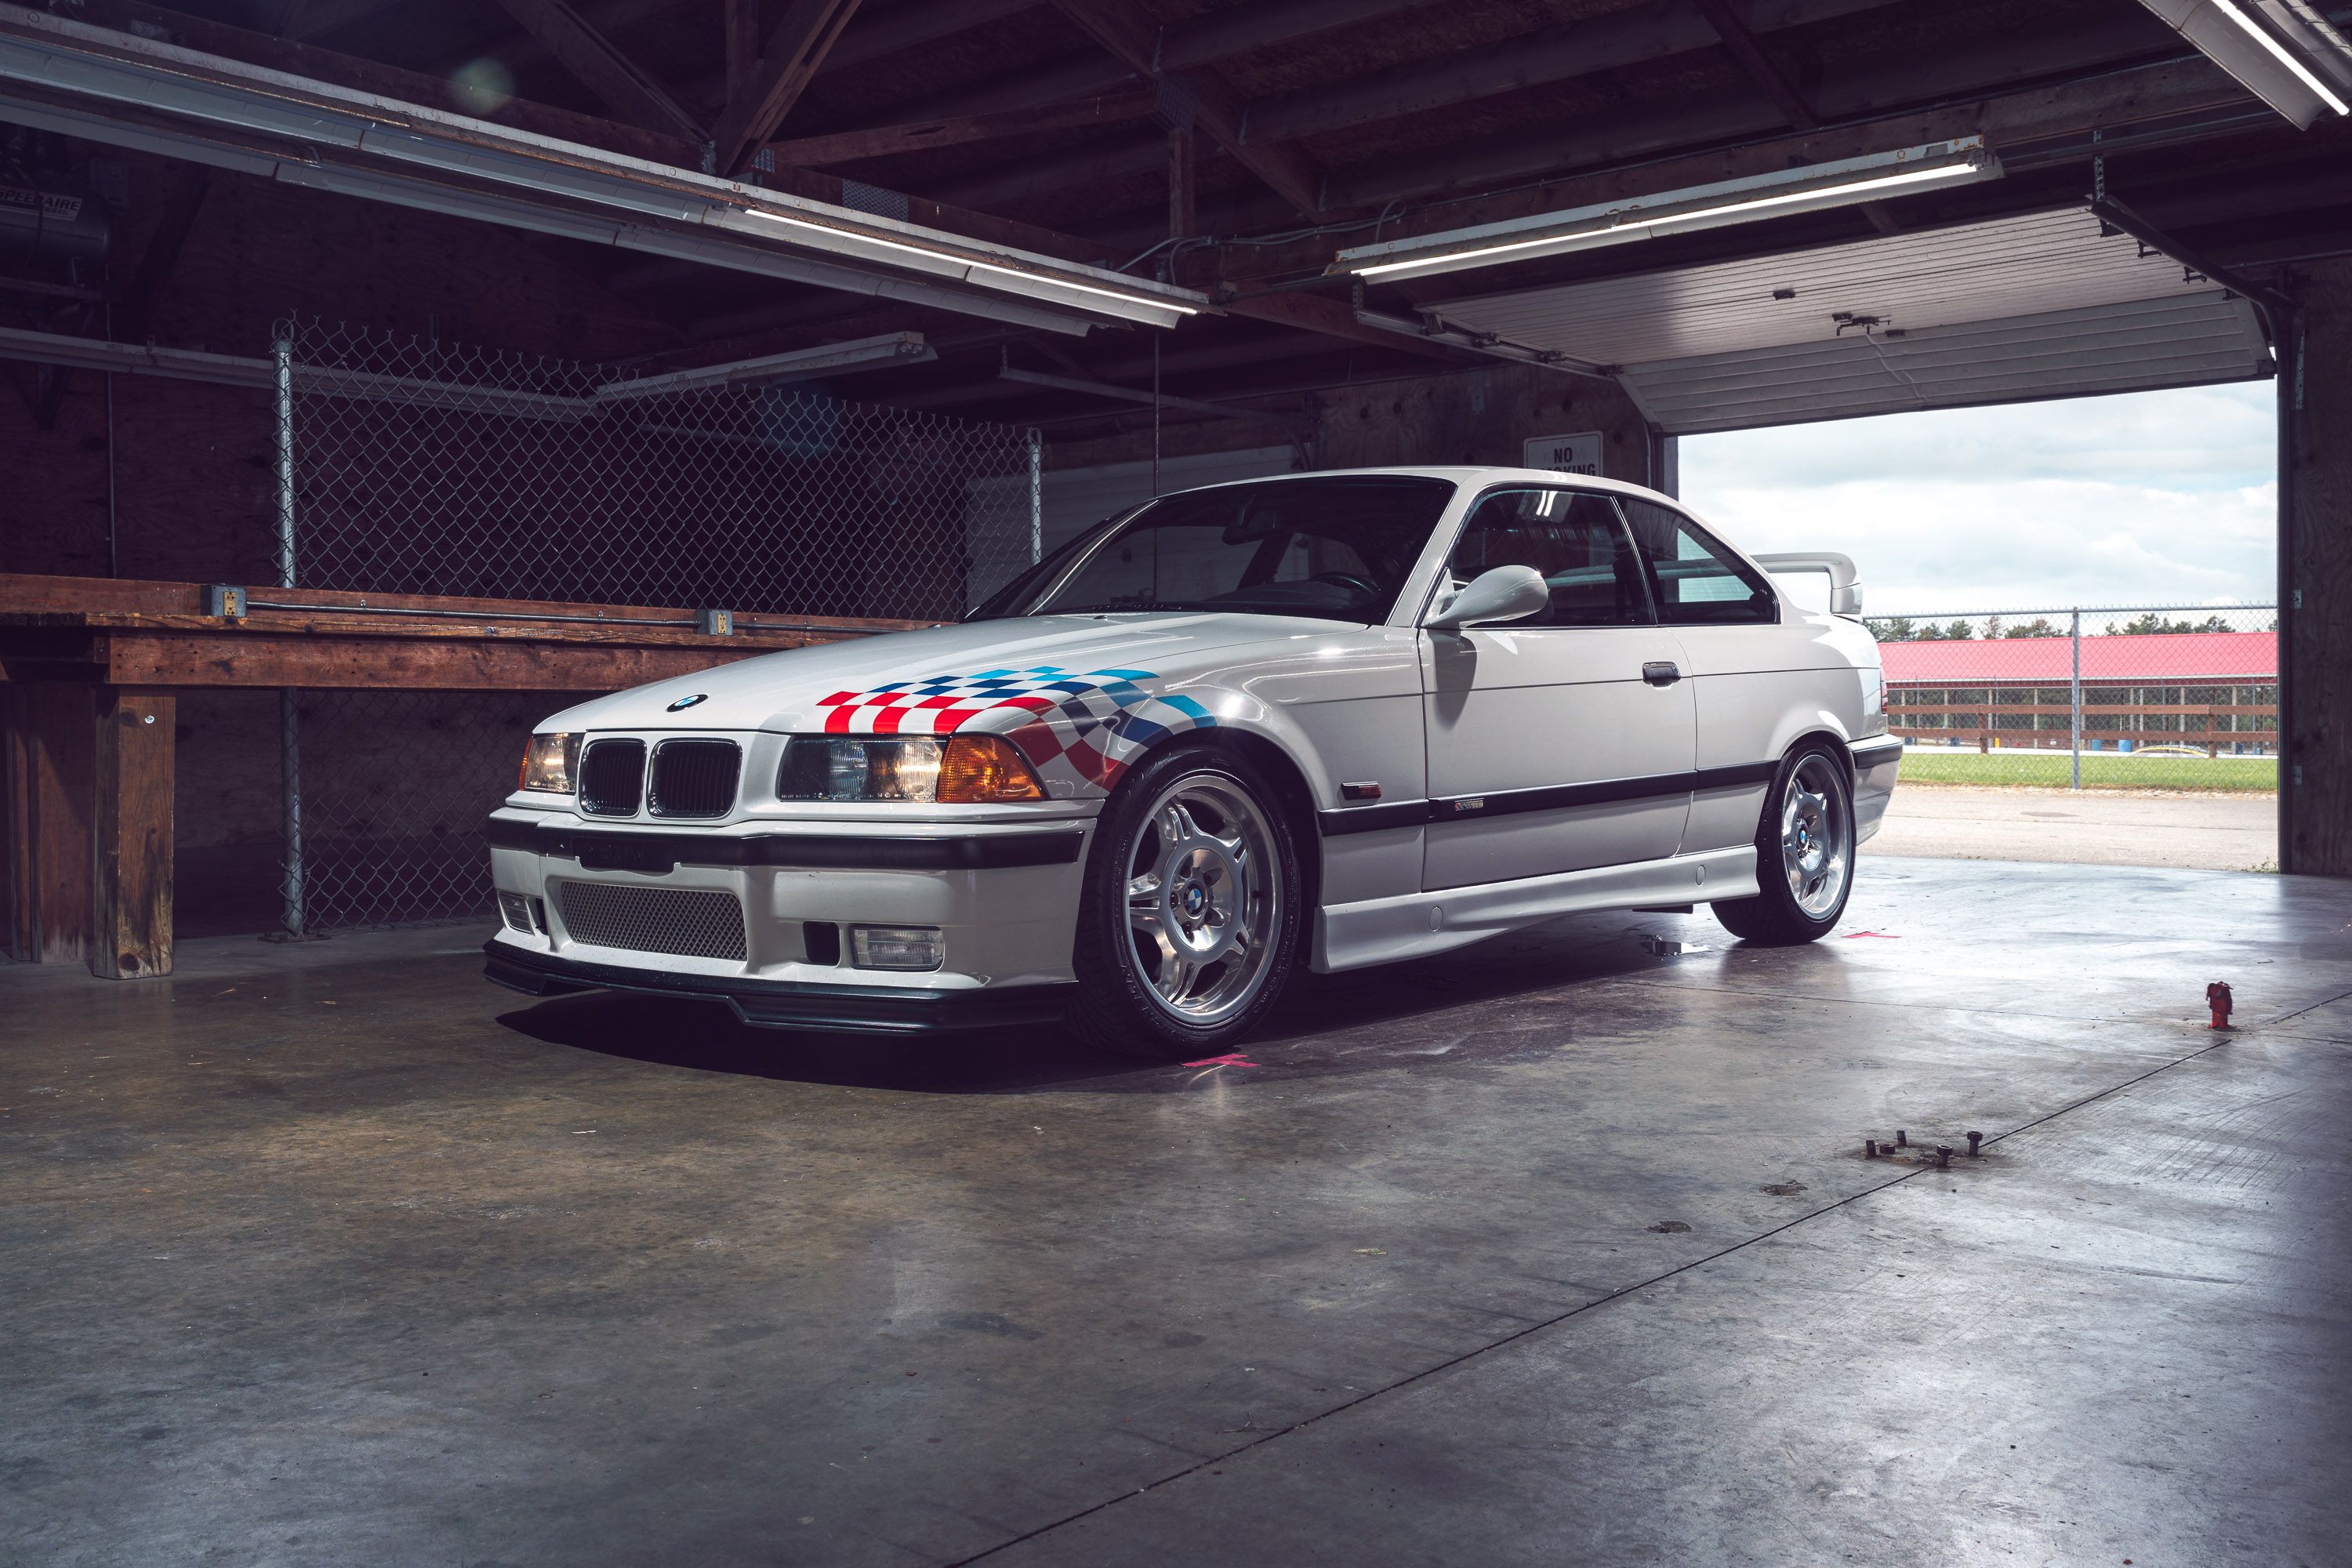 BMW E36 M3: Why Car Enthusiasts Love It